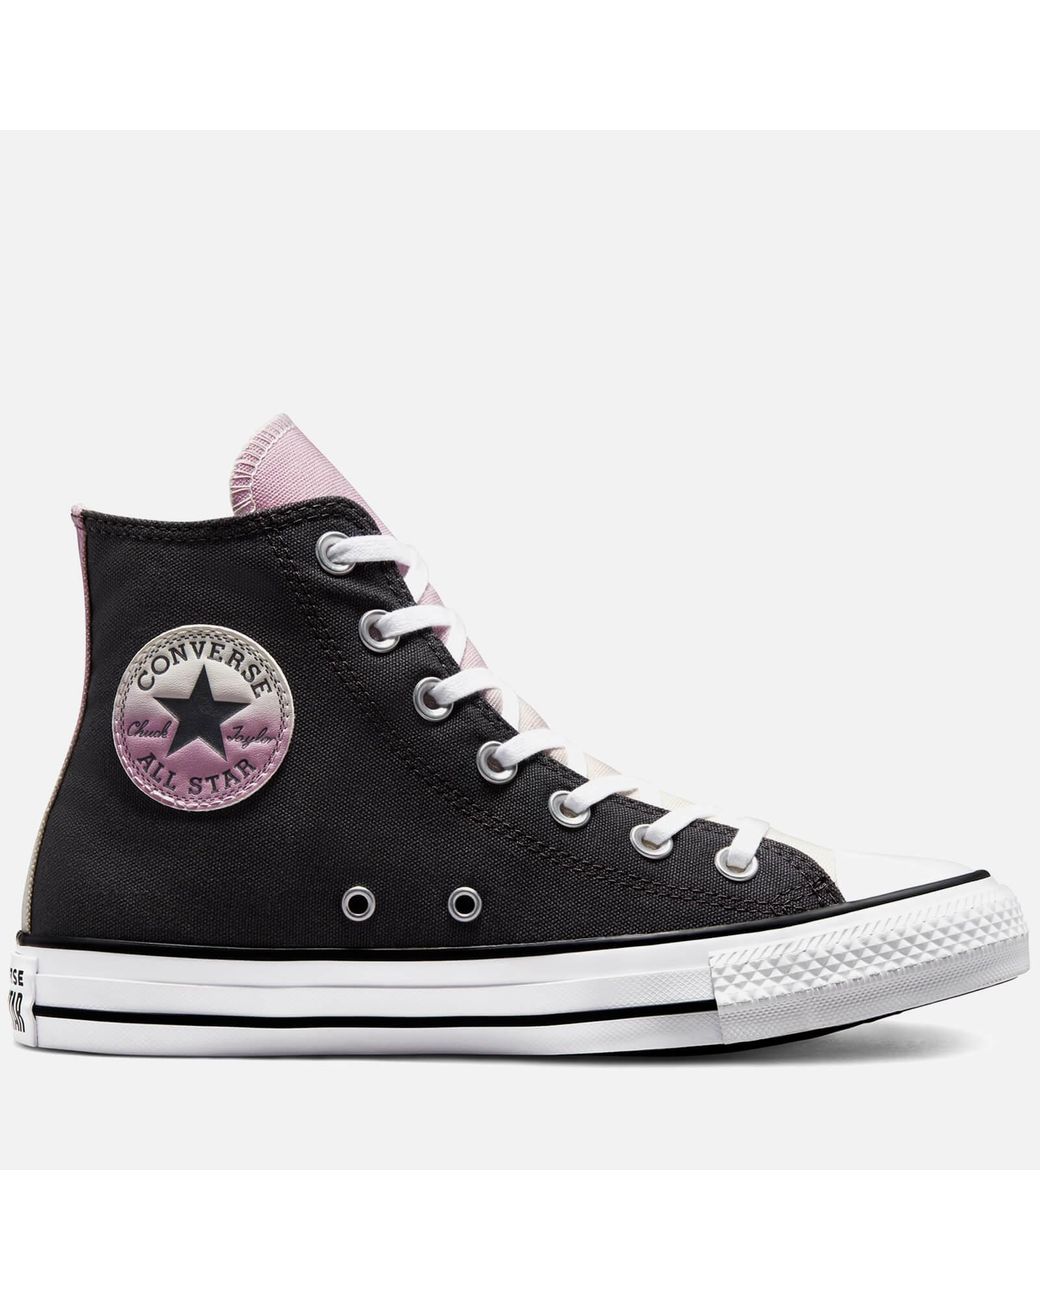 Converse Canvas Chuck Taylor All Star Ombré Hi-top Trainers in Black | Lyst